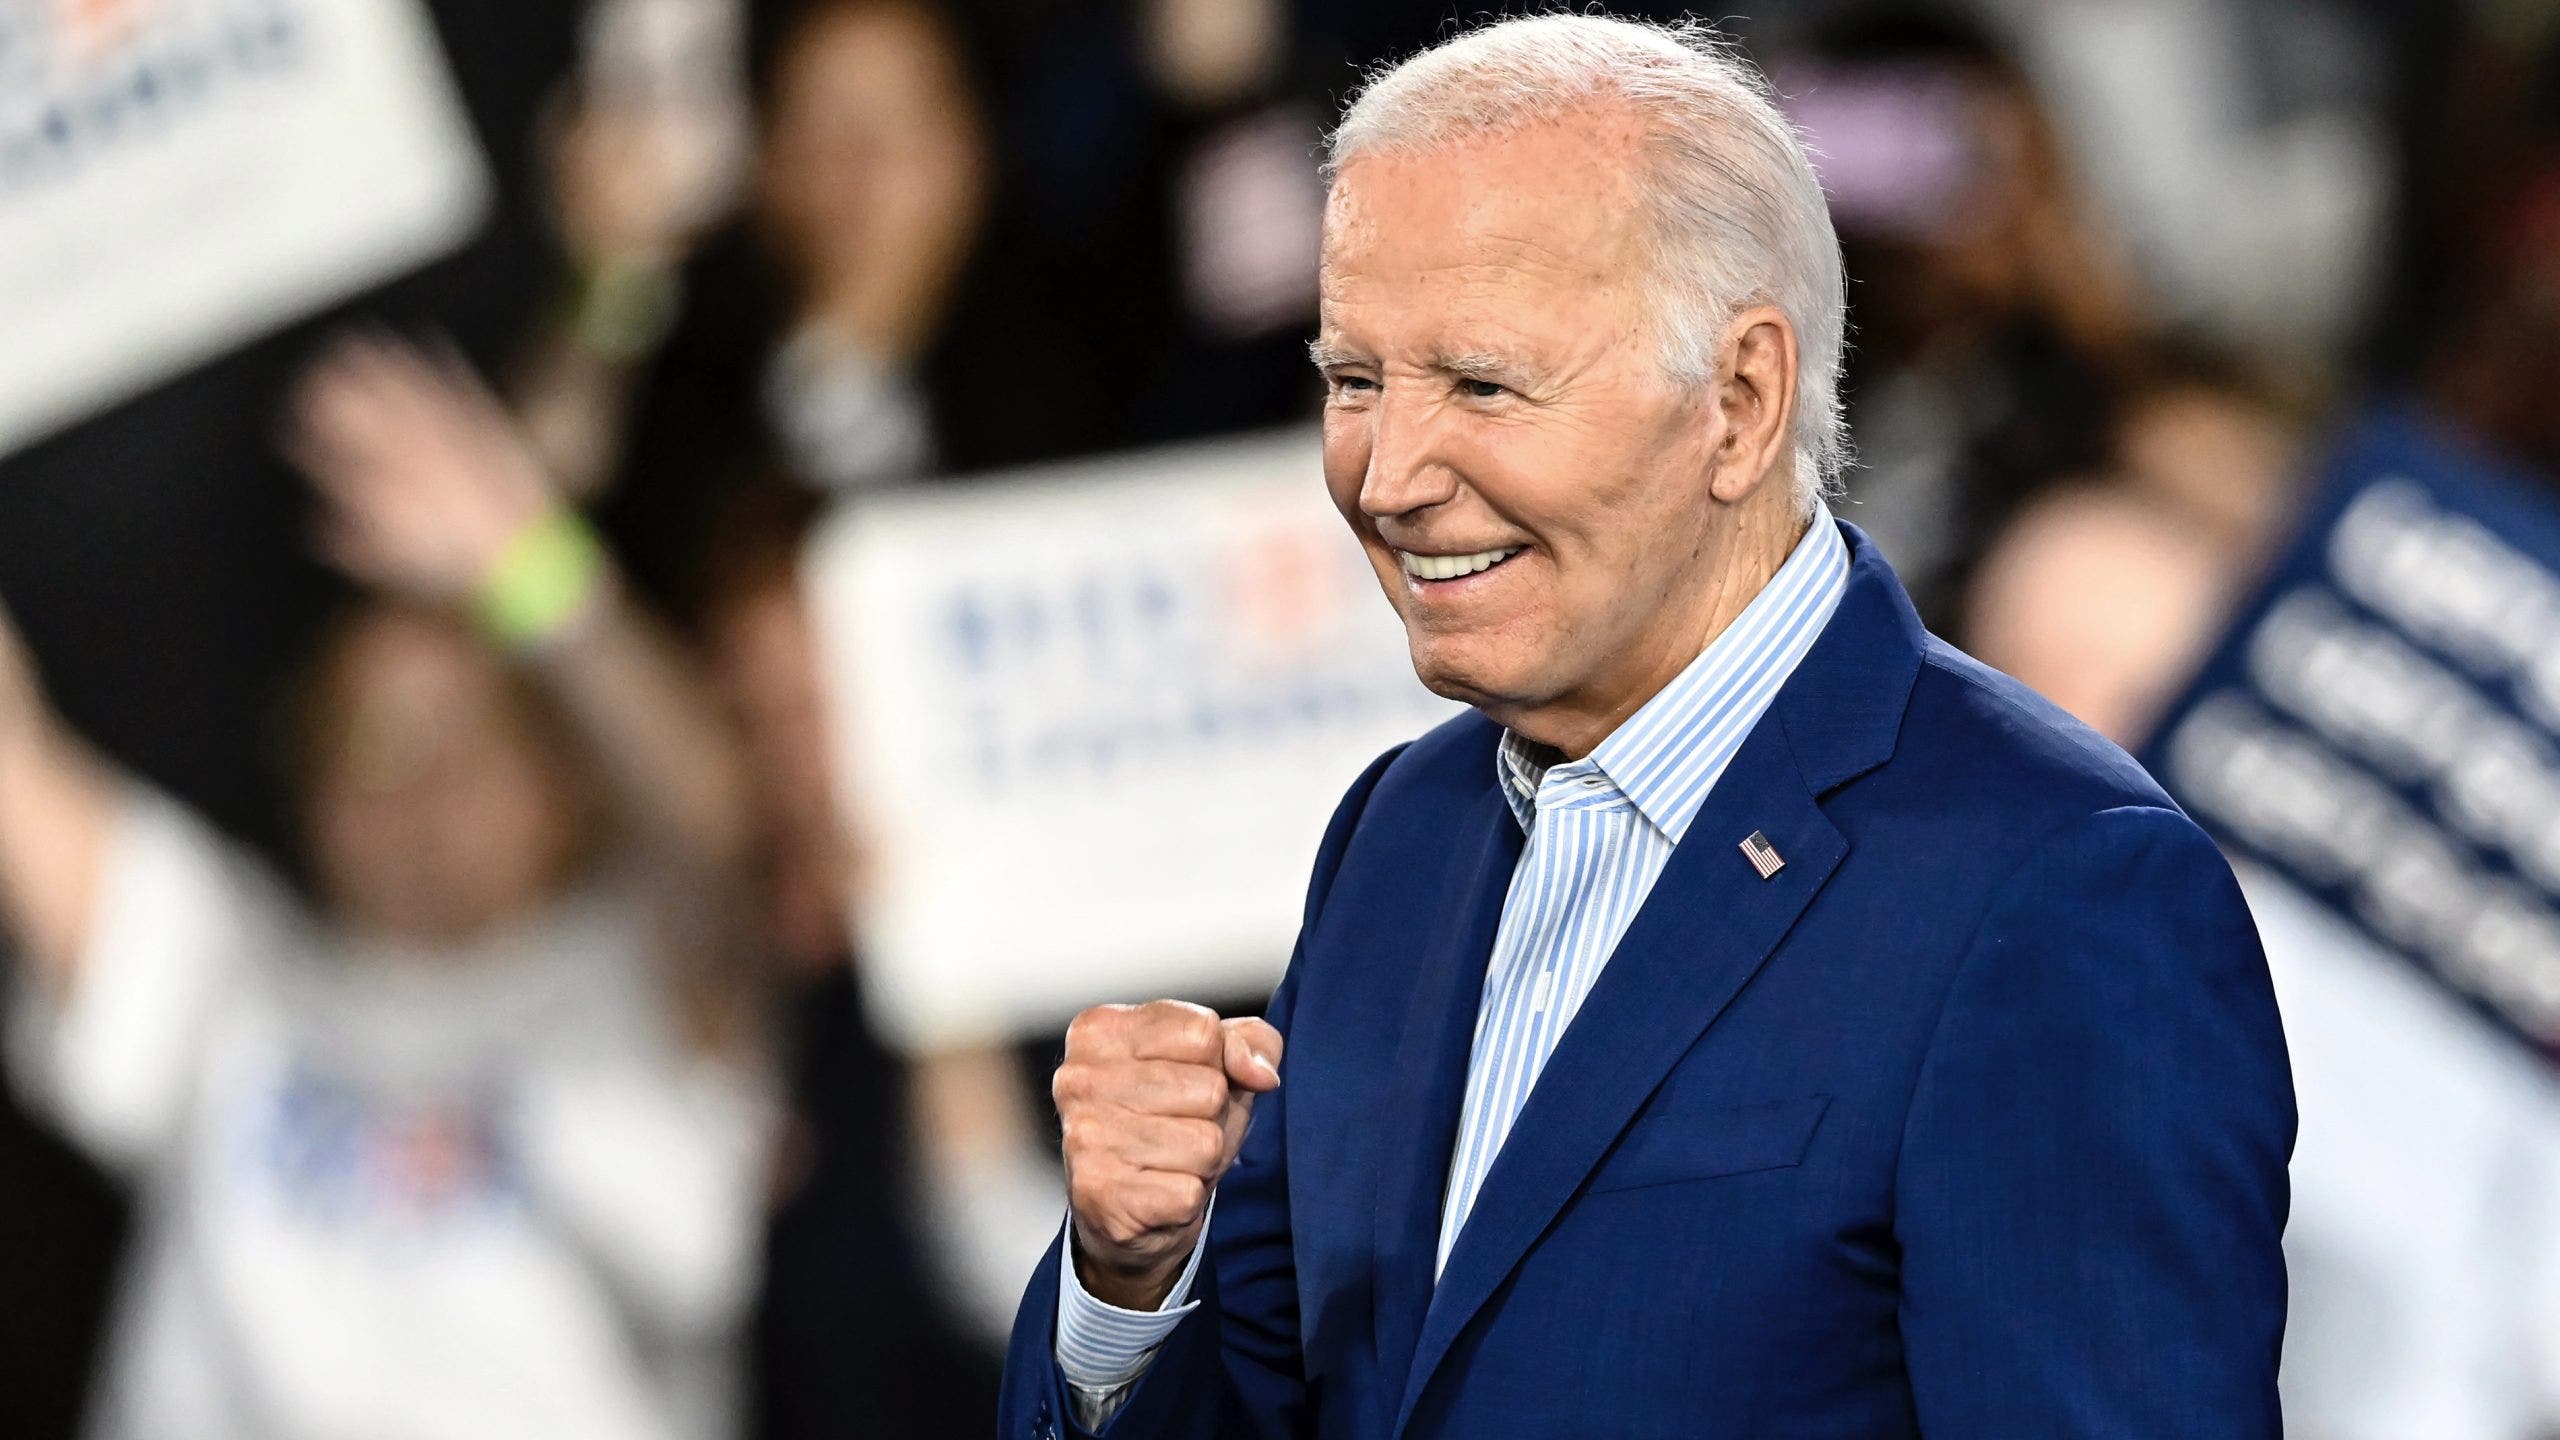 Biden meeting with Democrat governors Wednesday following disastrous debate performance